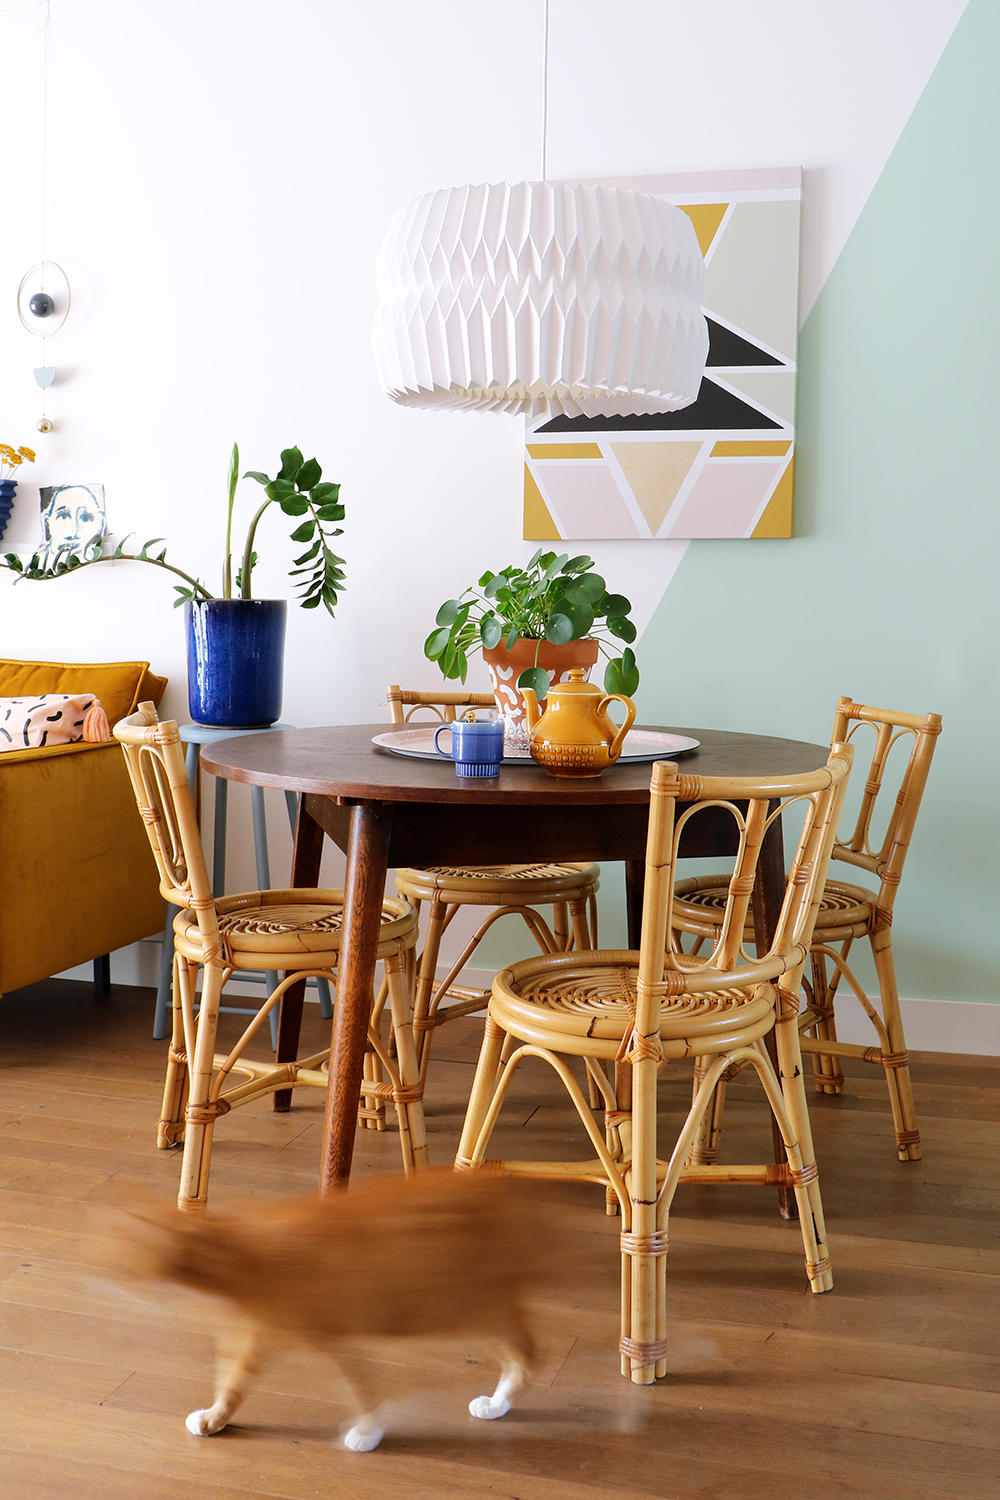 Rattan dining chairs - €160 - Enter My Attic (only available to Netherlands buyers sadly!) 